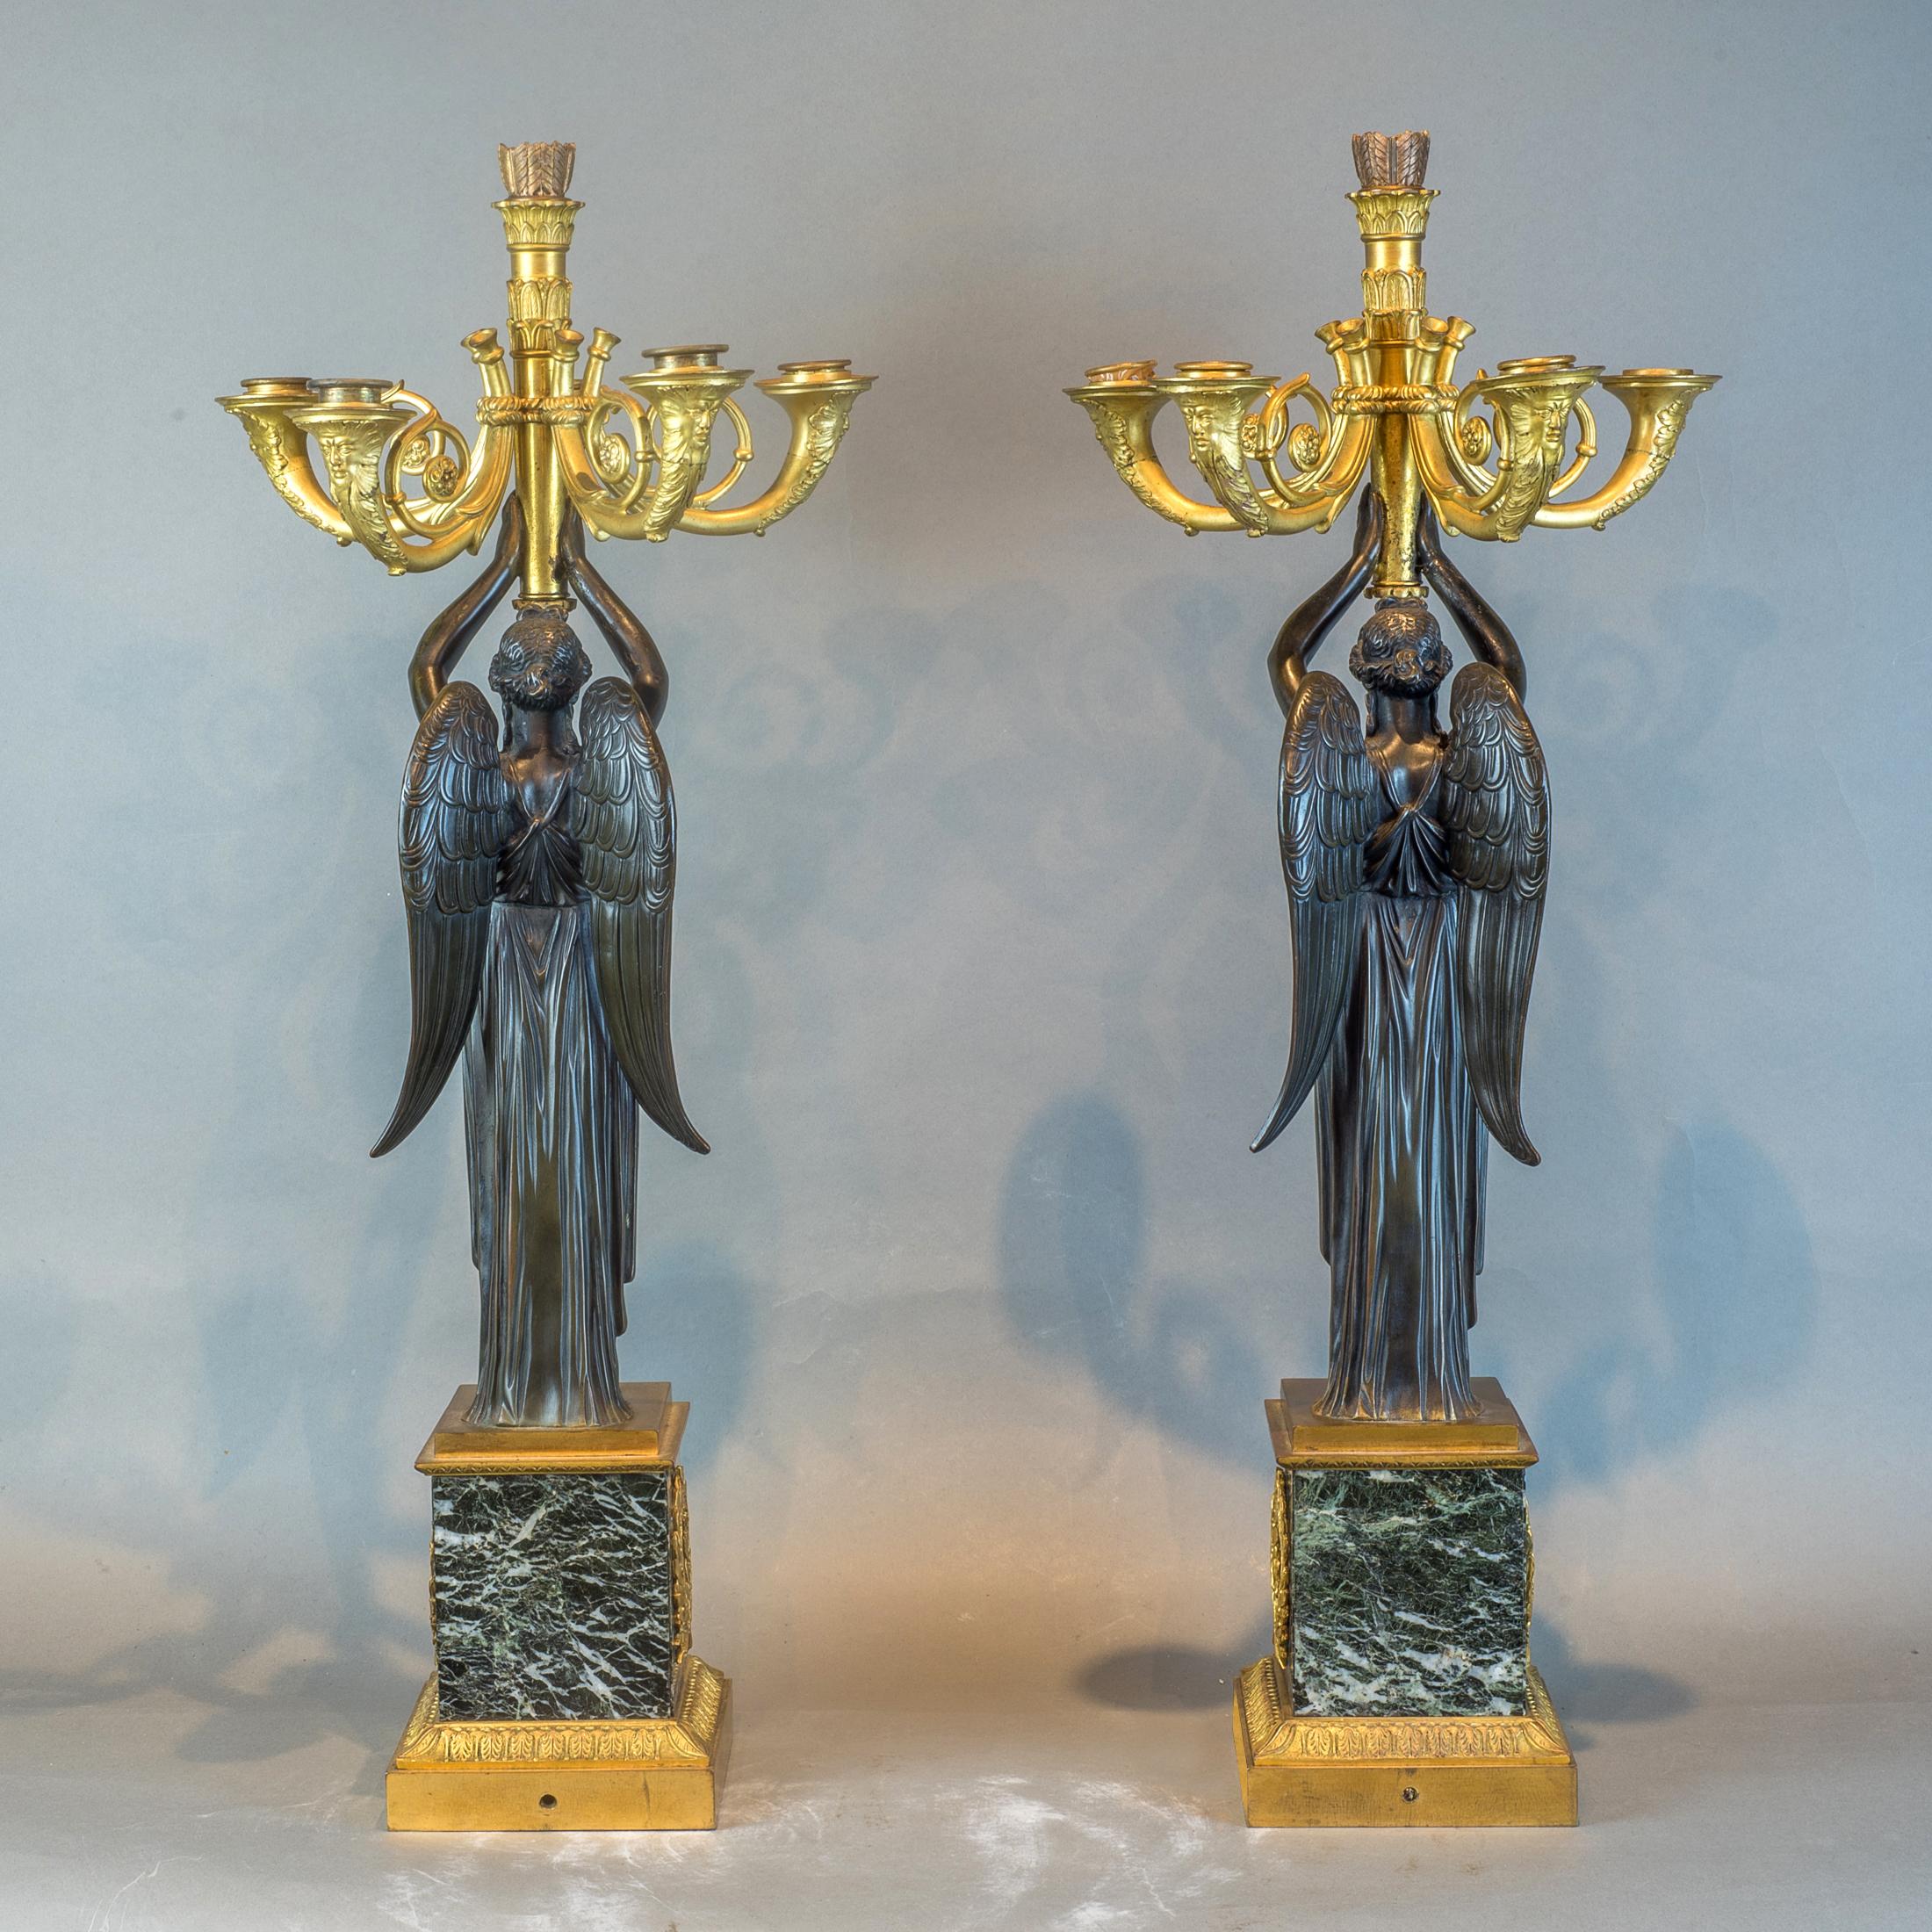 French  Pair of Empire Gilt and Patinated Bronze Six-Light Figural Candelabras For Sale